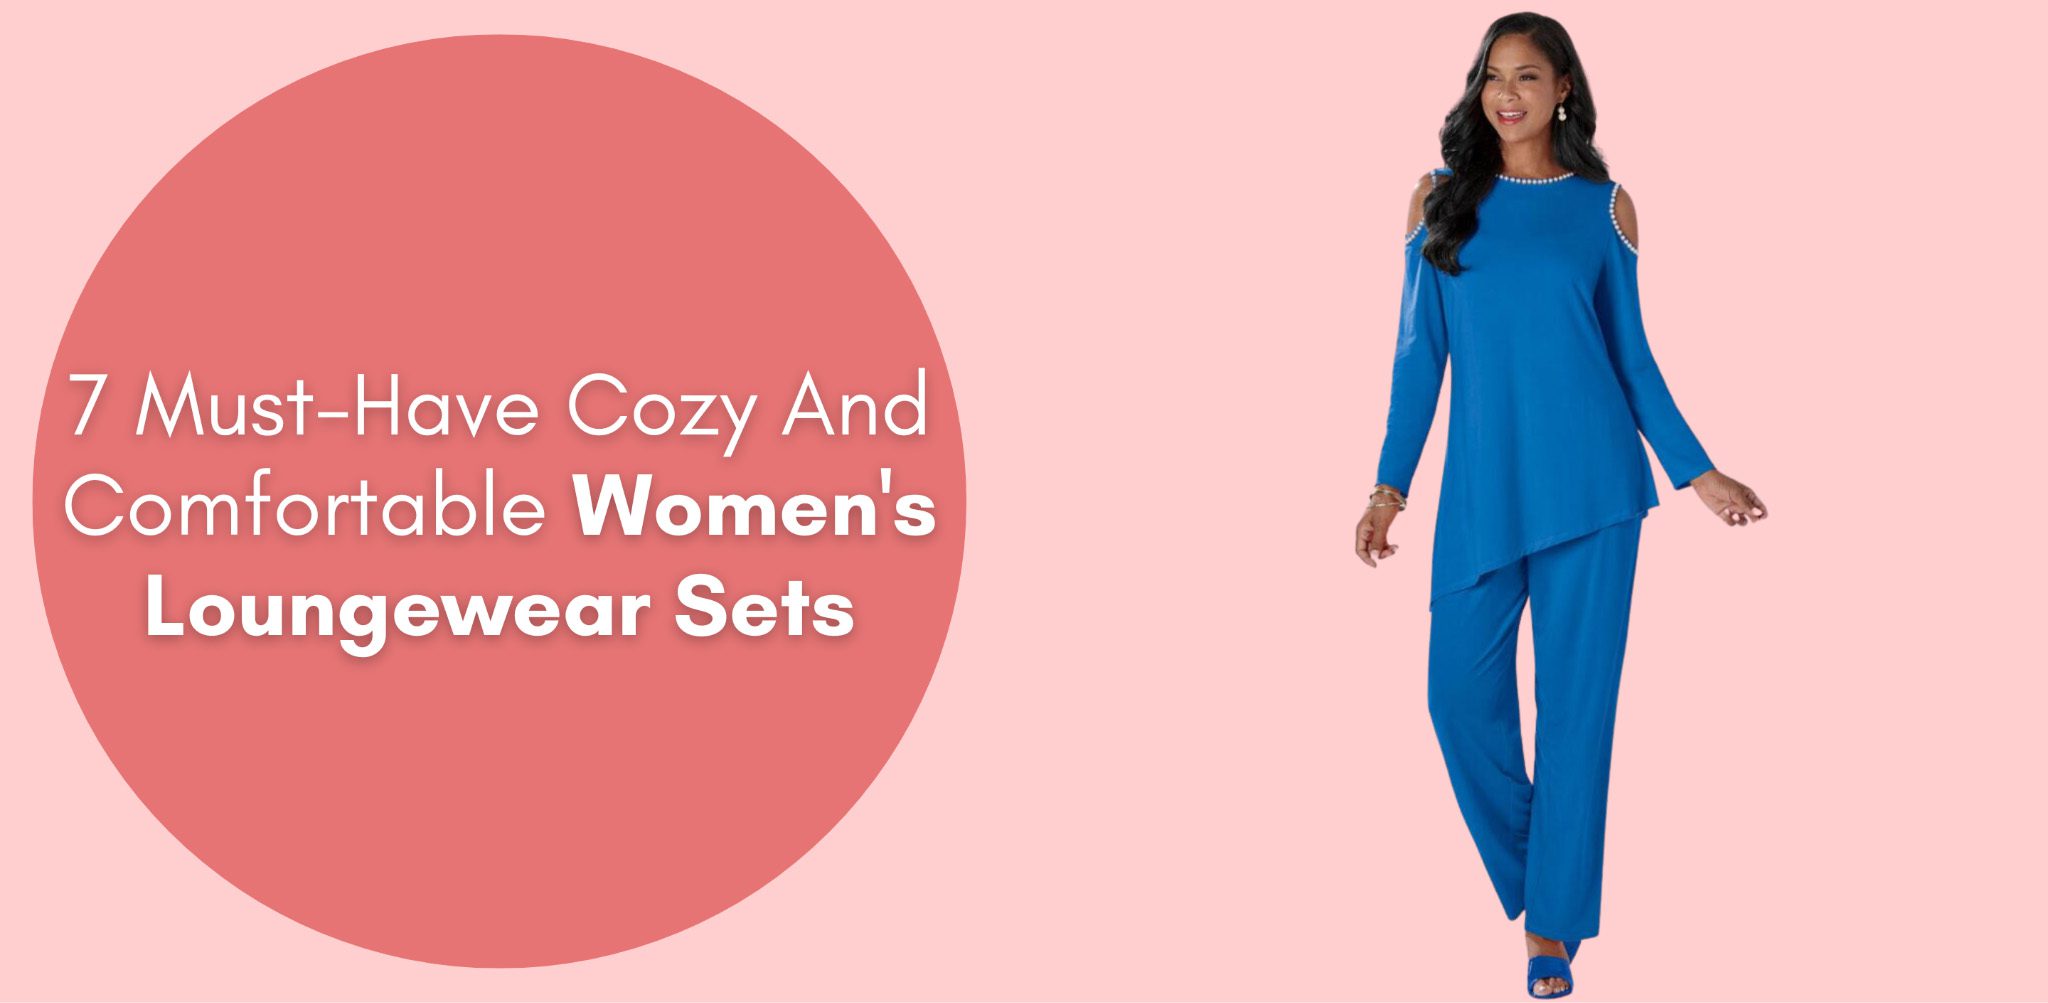 7 Must-Have Cozy And Comfortable Women's Loungewear Sets